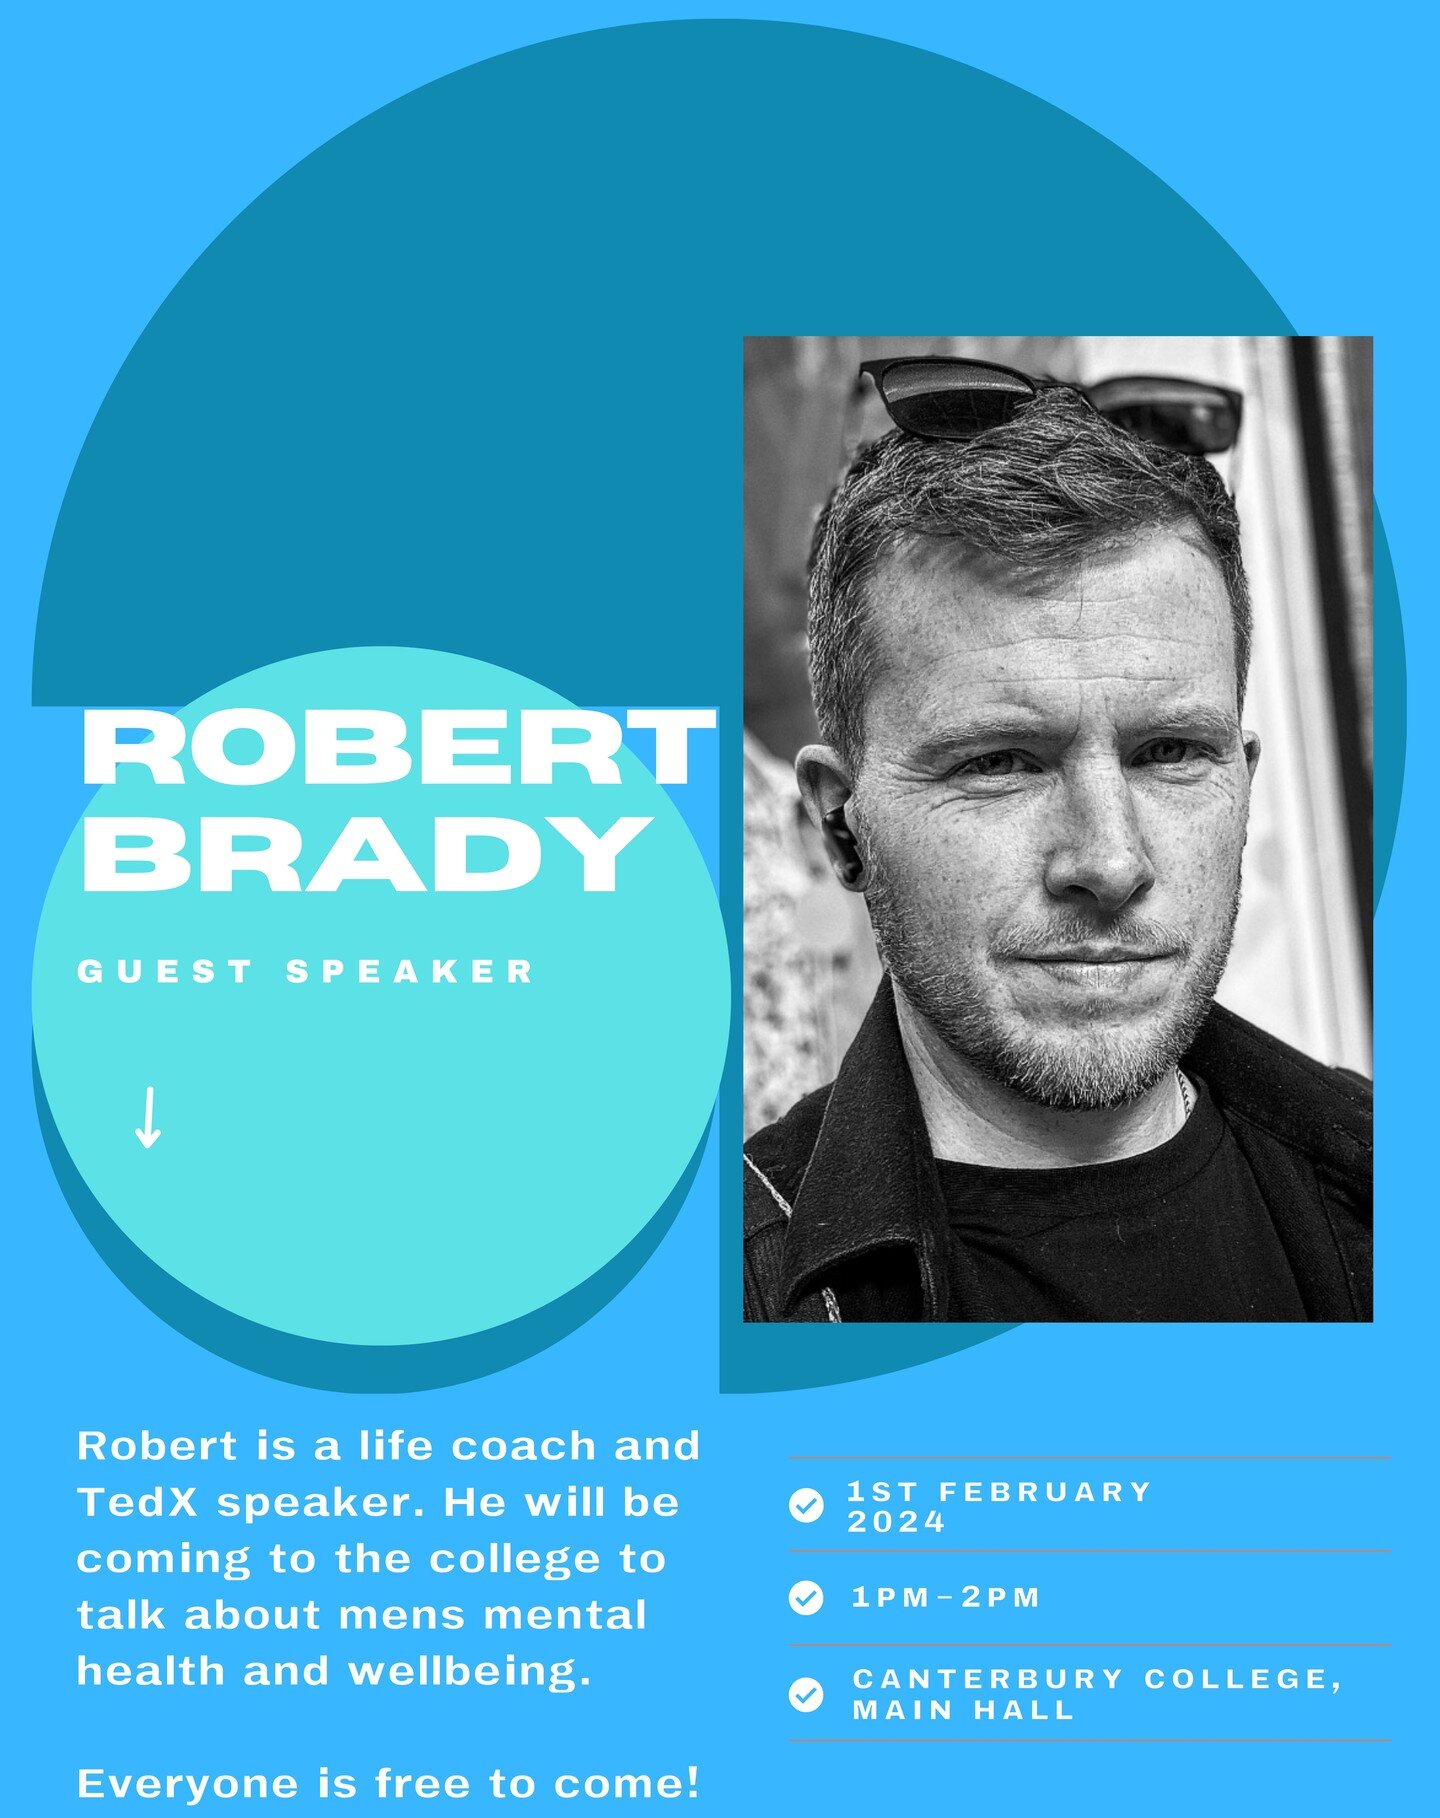 Join me on Feb 1st at 1 PM in the Main Hall for an empowering talk with Robert Brady, as we delve into the crucial conversation about Toxic Masculinity and Men's Mental Health. Let's break the stigma together and foster a supportive environment for e